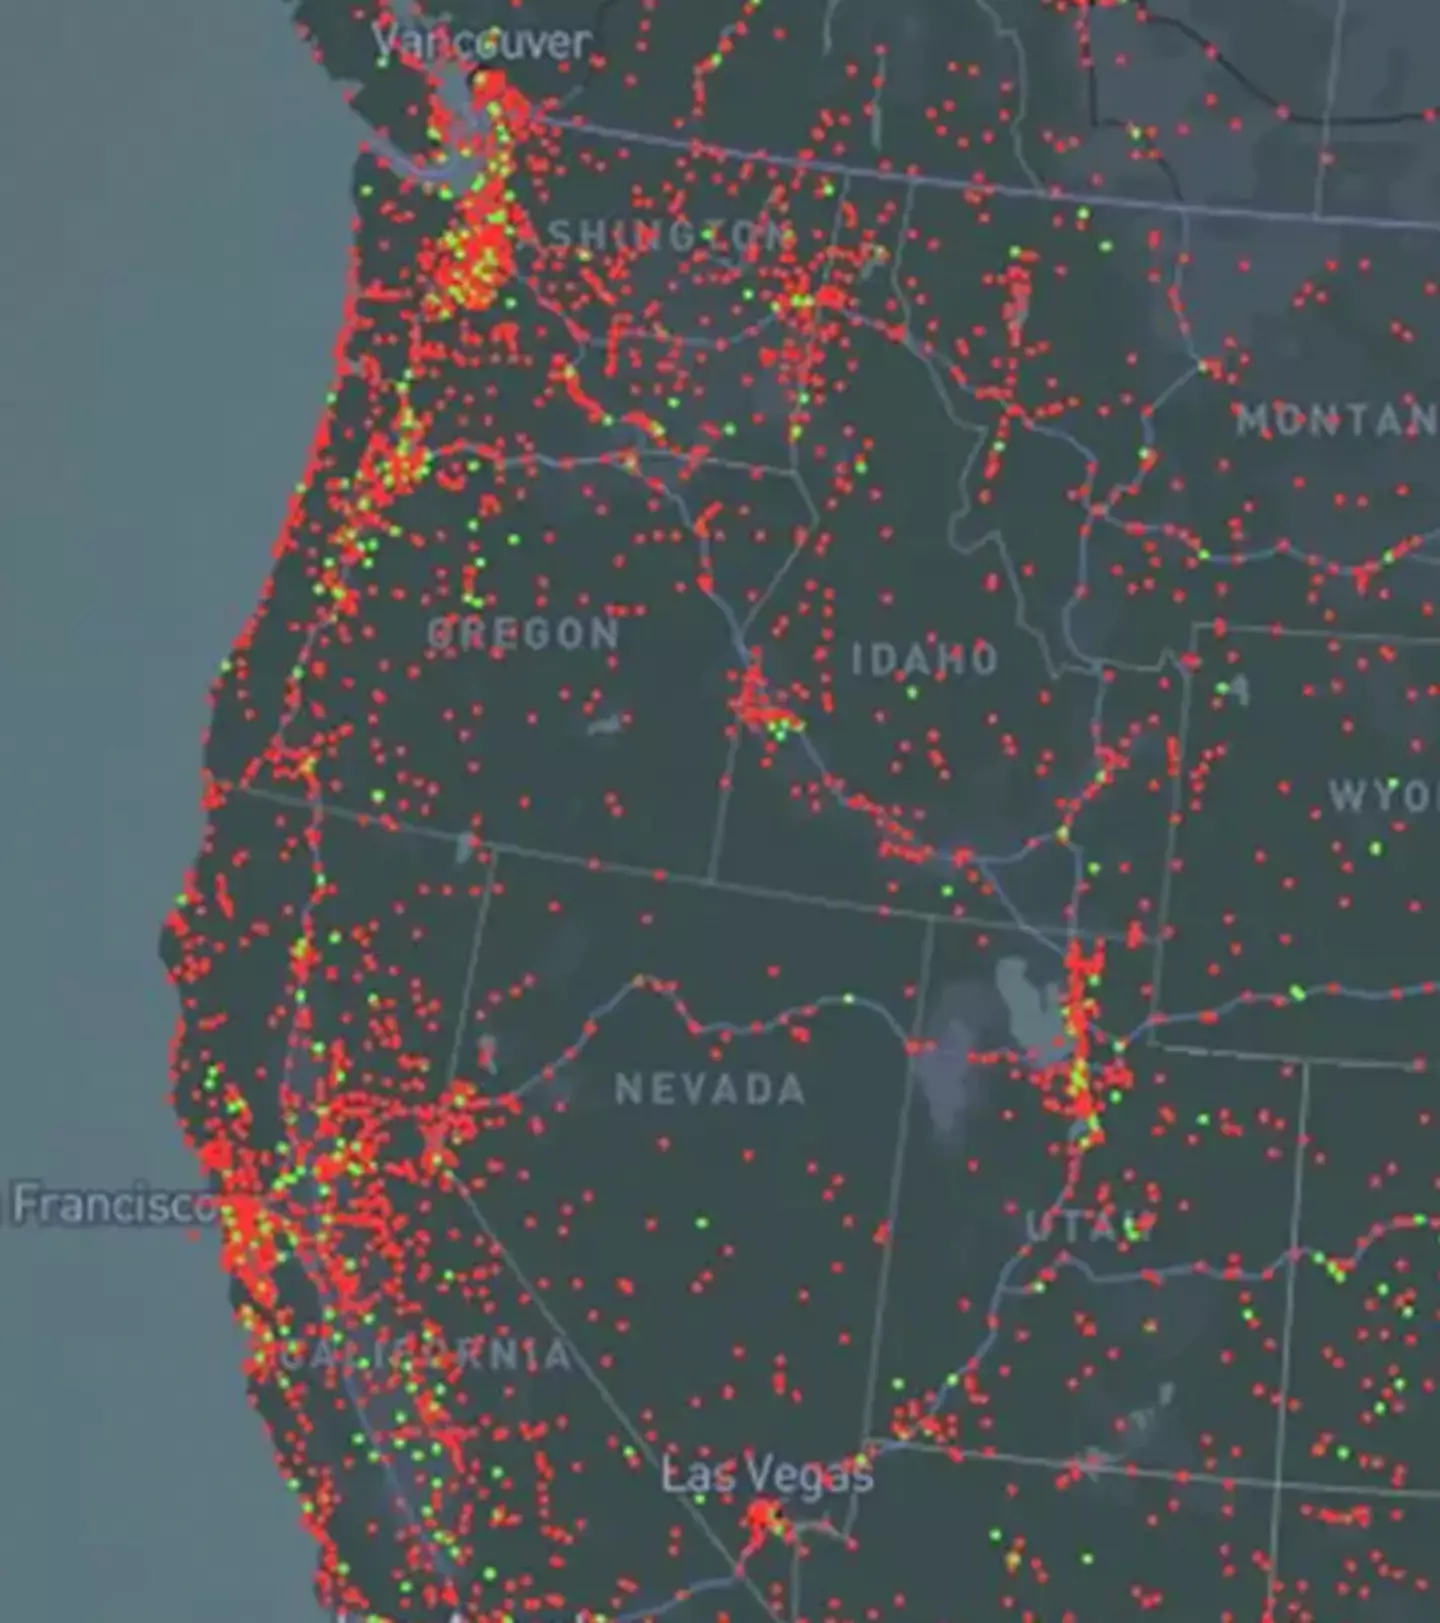 The NUFORC has designed a map that compiles all the UFO sightings in the US / National UFO Reporting Center